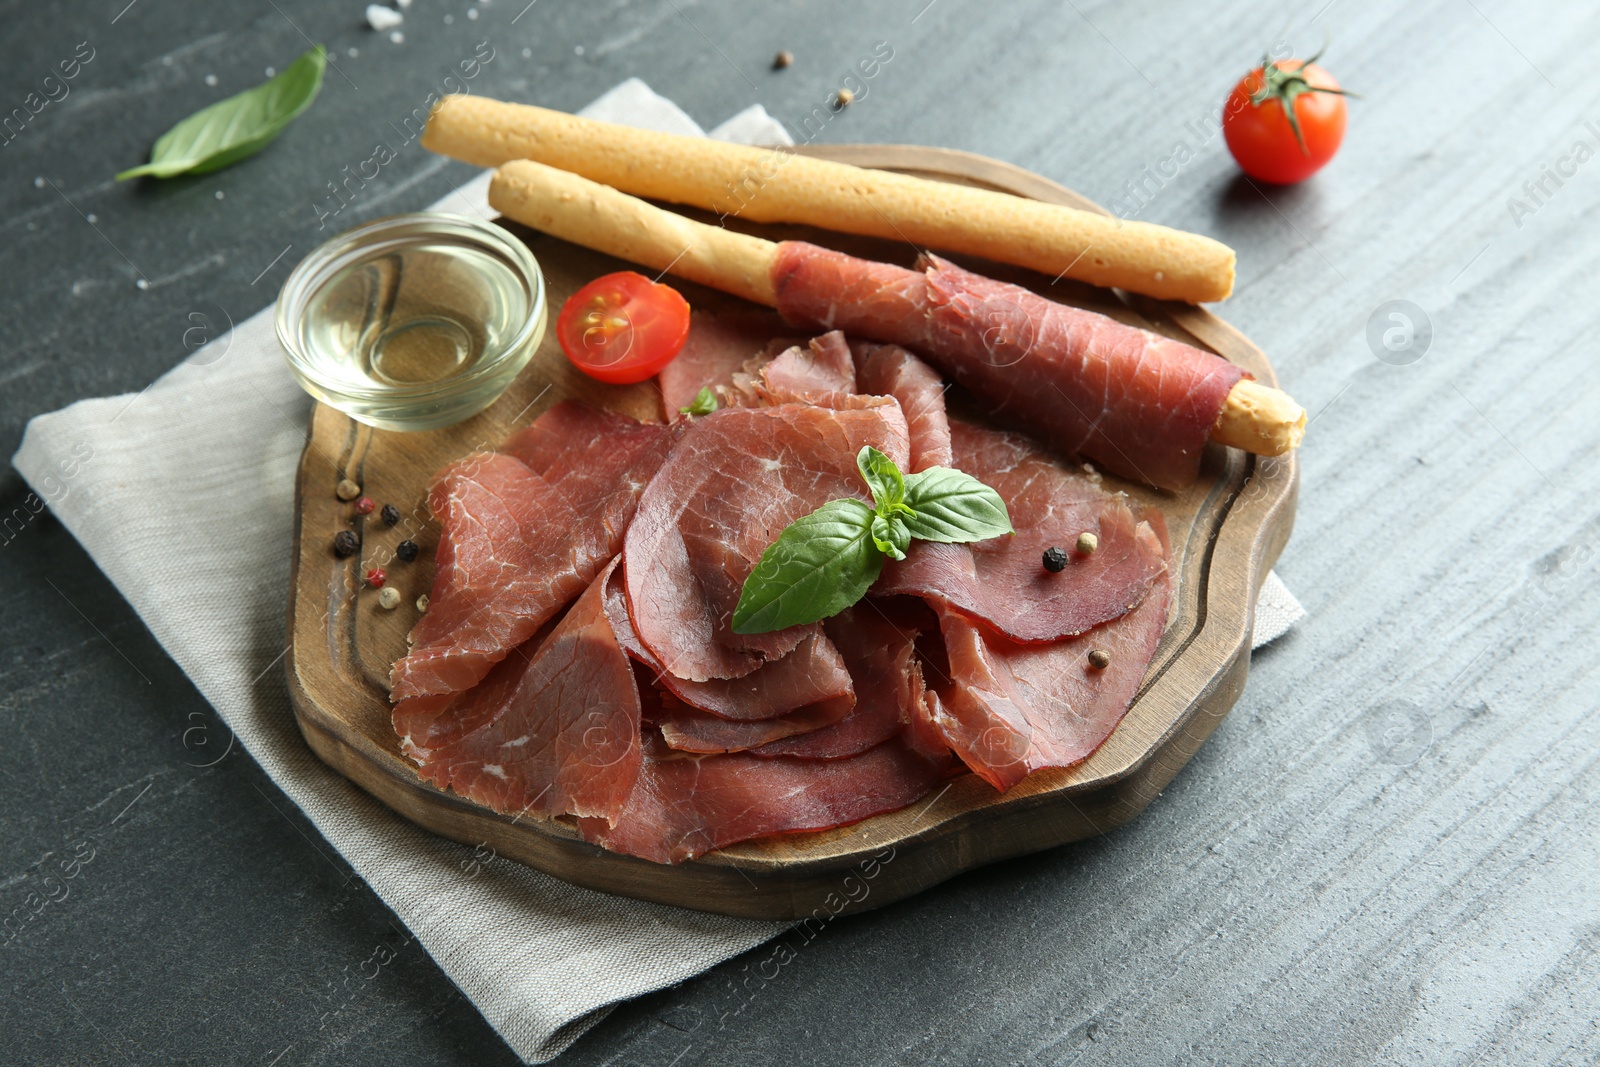 Photo of Delicious bresaola, tomato, grissini sticks and basil leaves on grey textured table